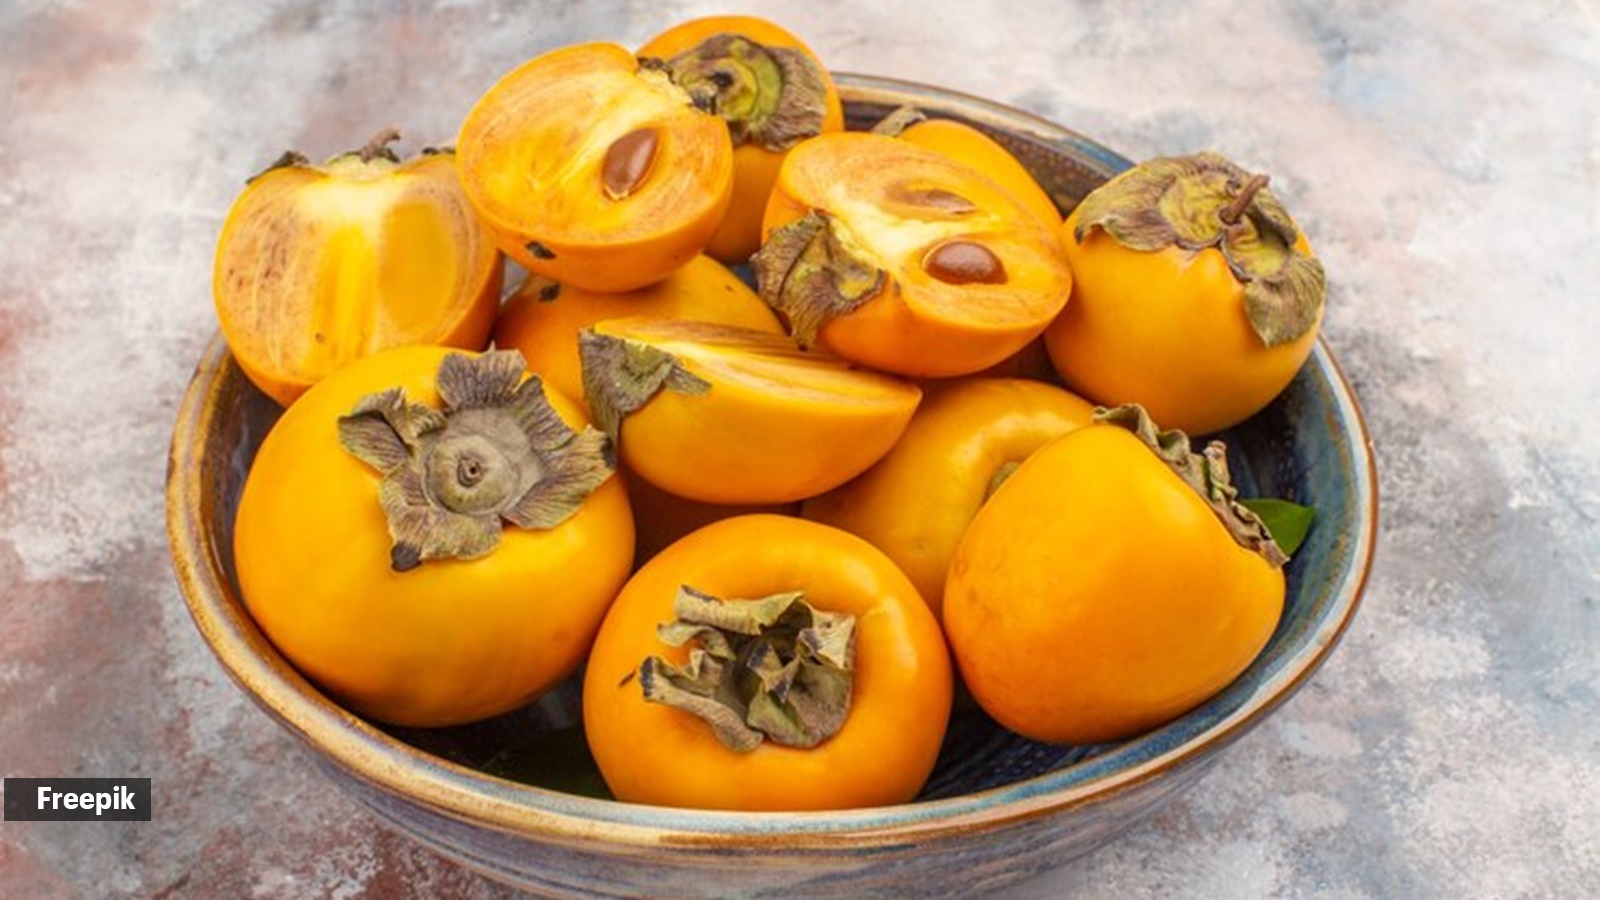 Nutrition alert: Here’s what a 100-gram serving of persimmon contains - The Indian Express